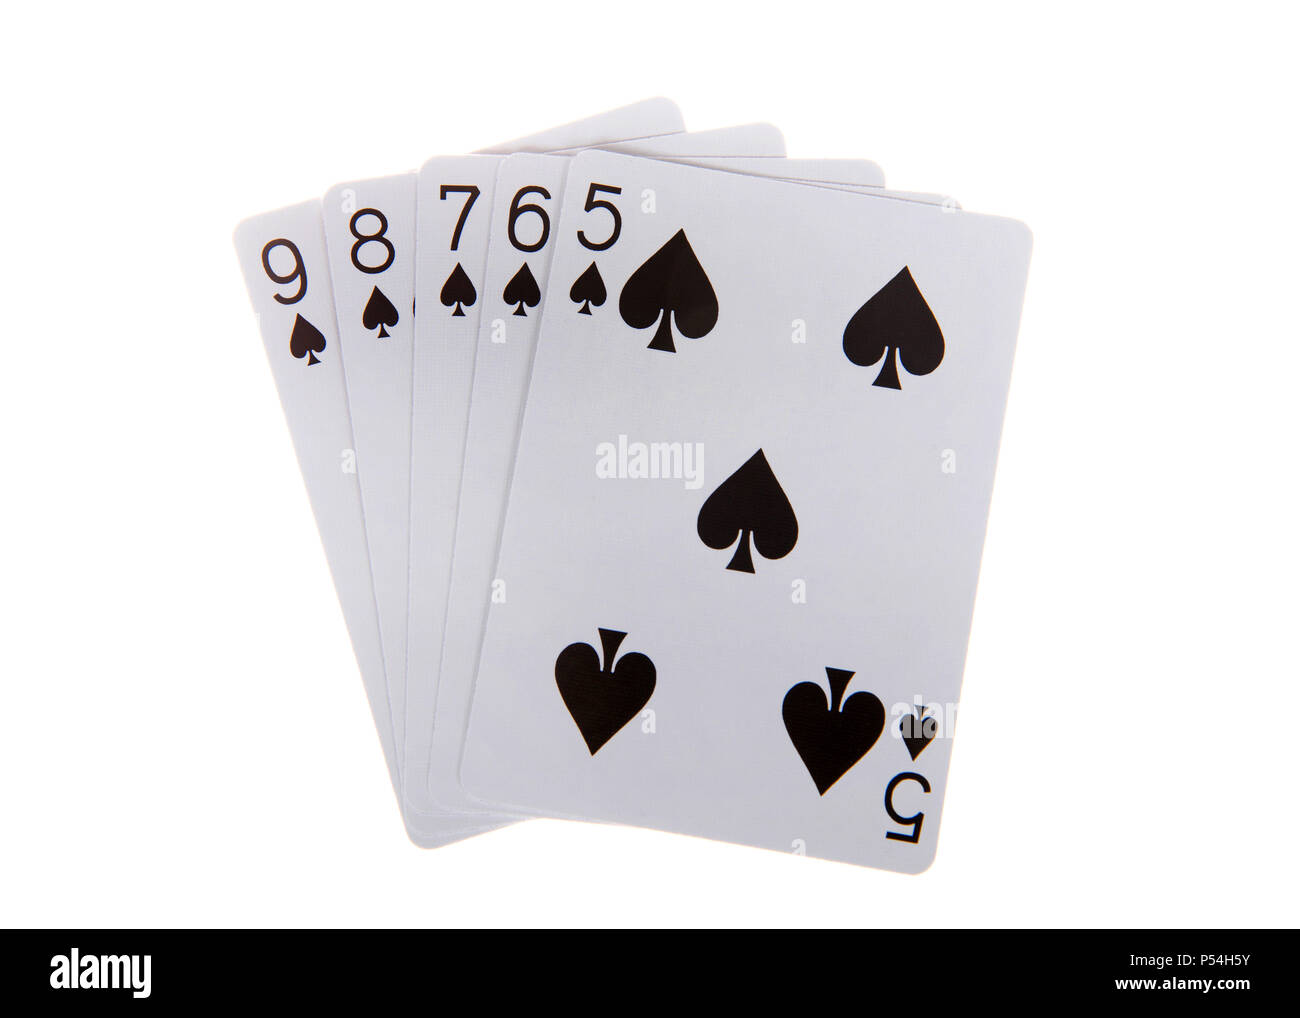 Playing cards, a straight flush. A straight flush is a five card ...